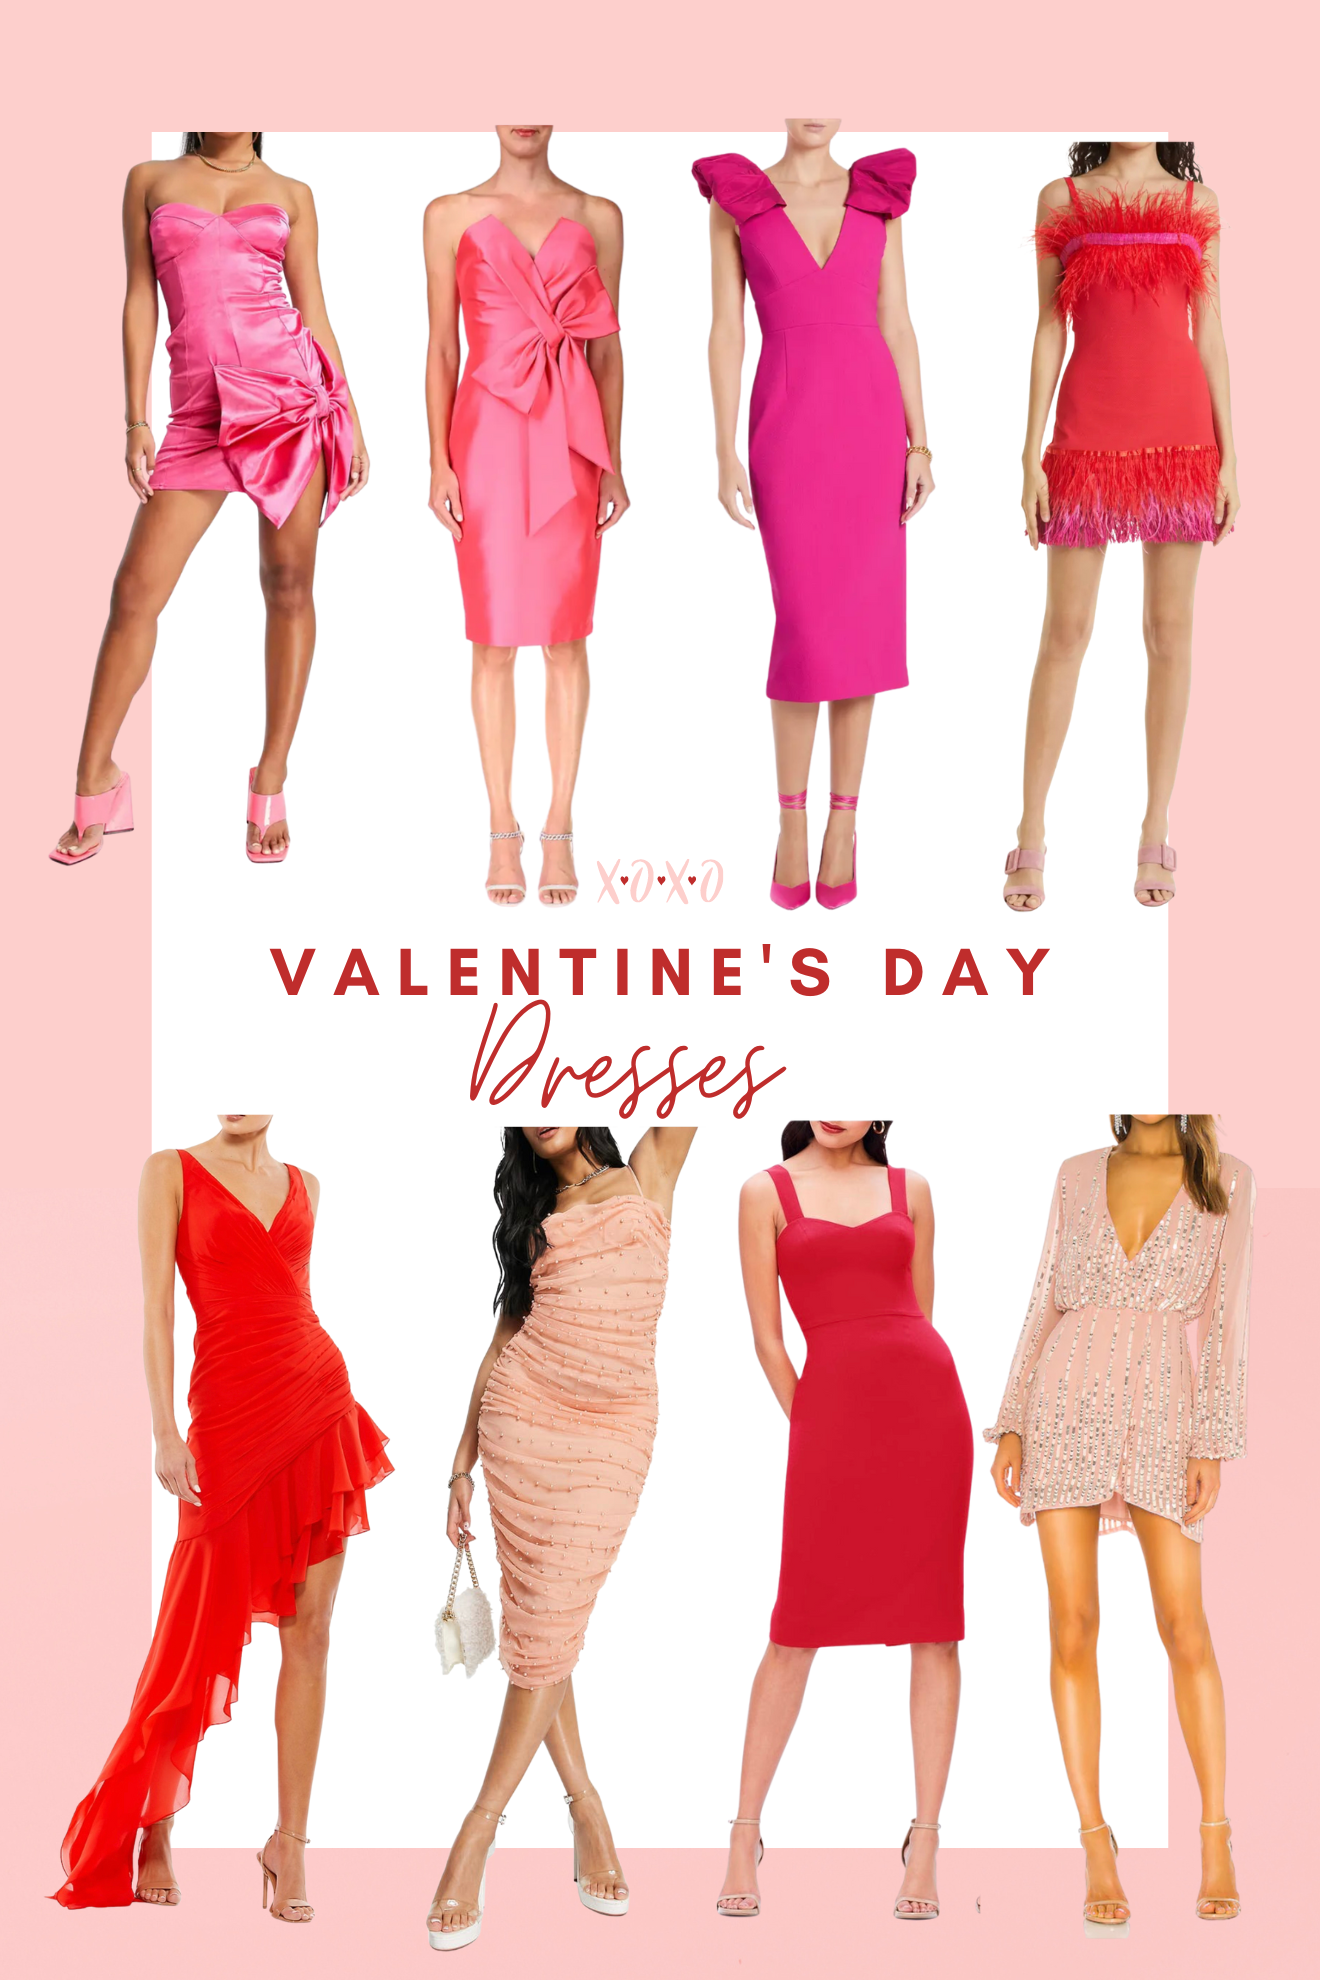 Valentine's Day Home Decor and Gift Ideas by Lifestyle Blogger Laura Lily, Valentine's Day Dresses,